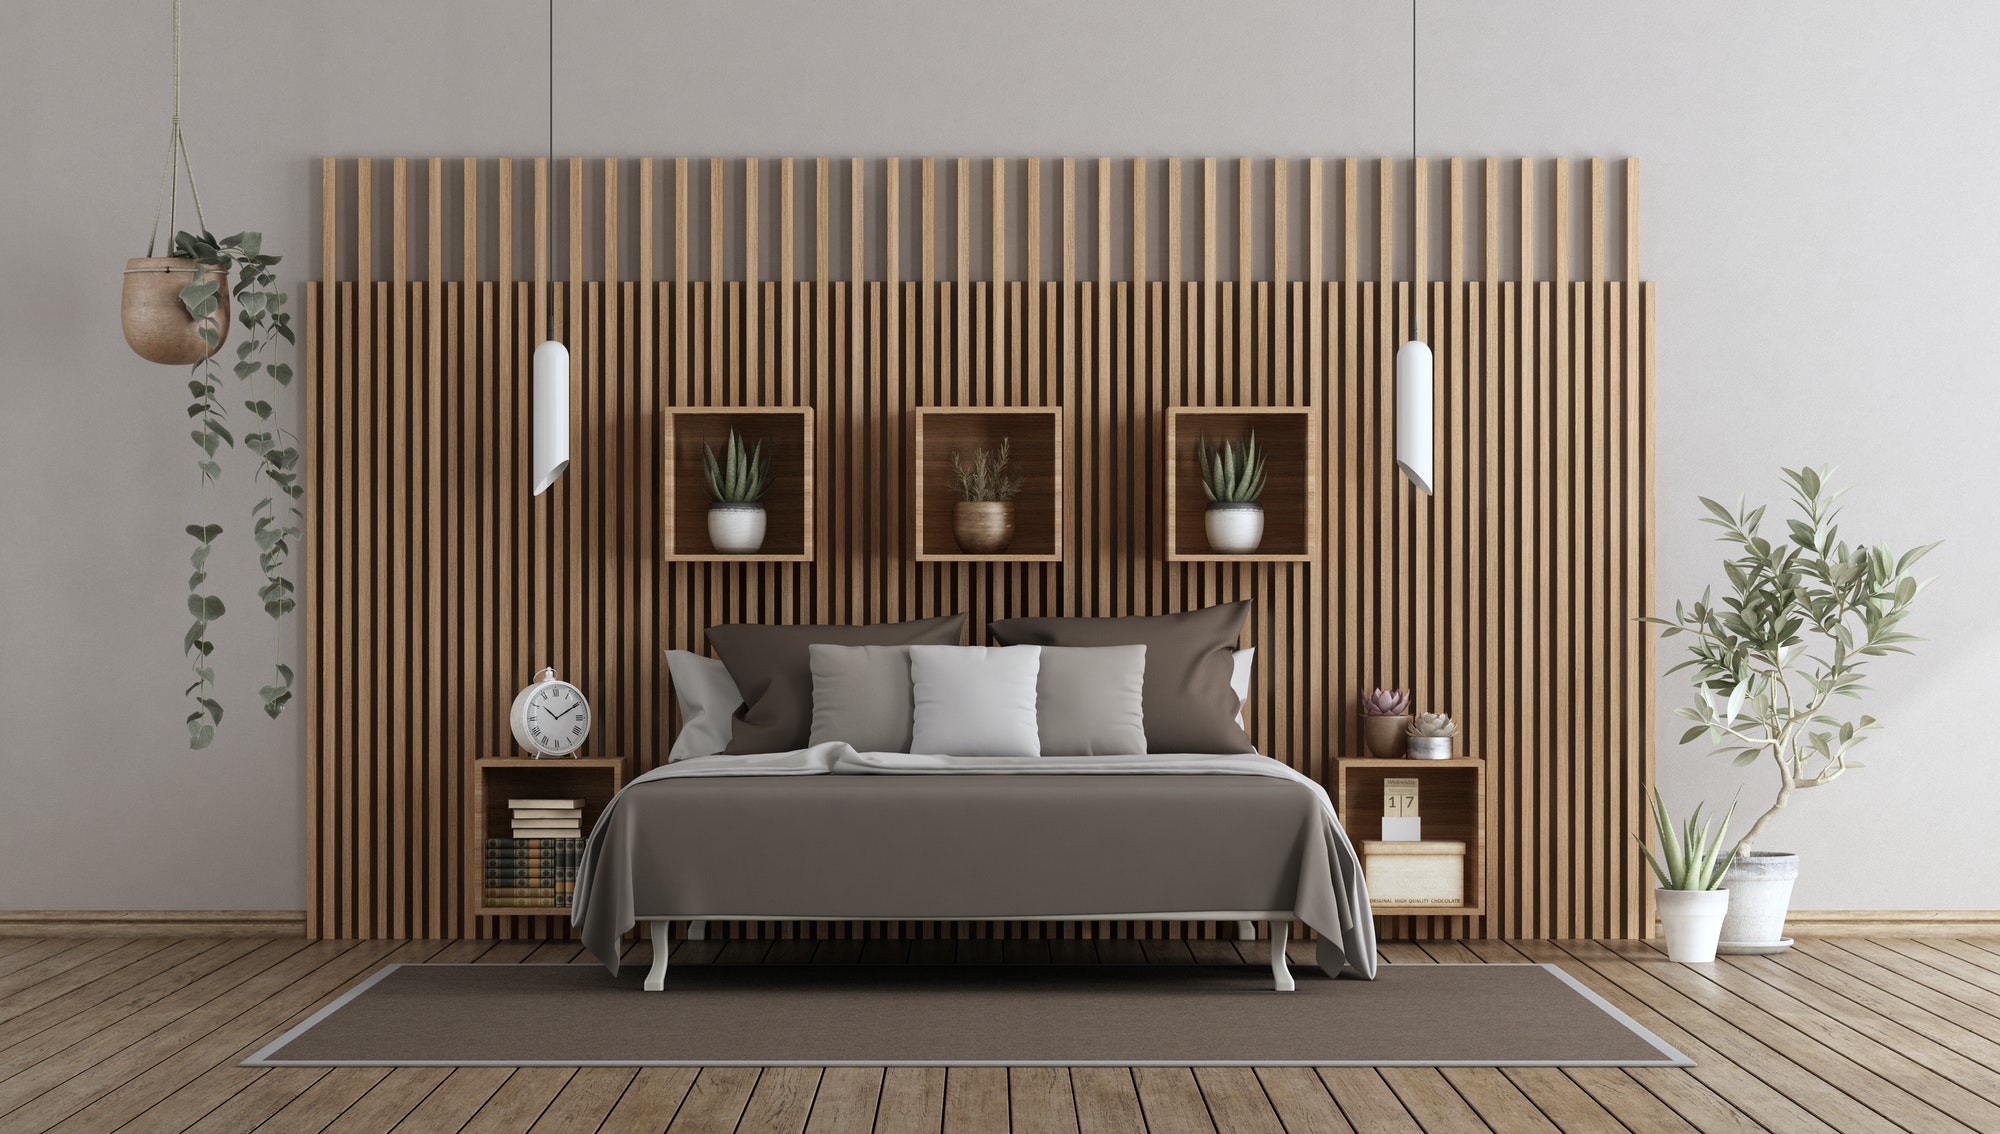 Master bedroom with bed against wooden paneling